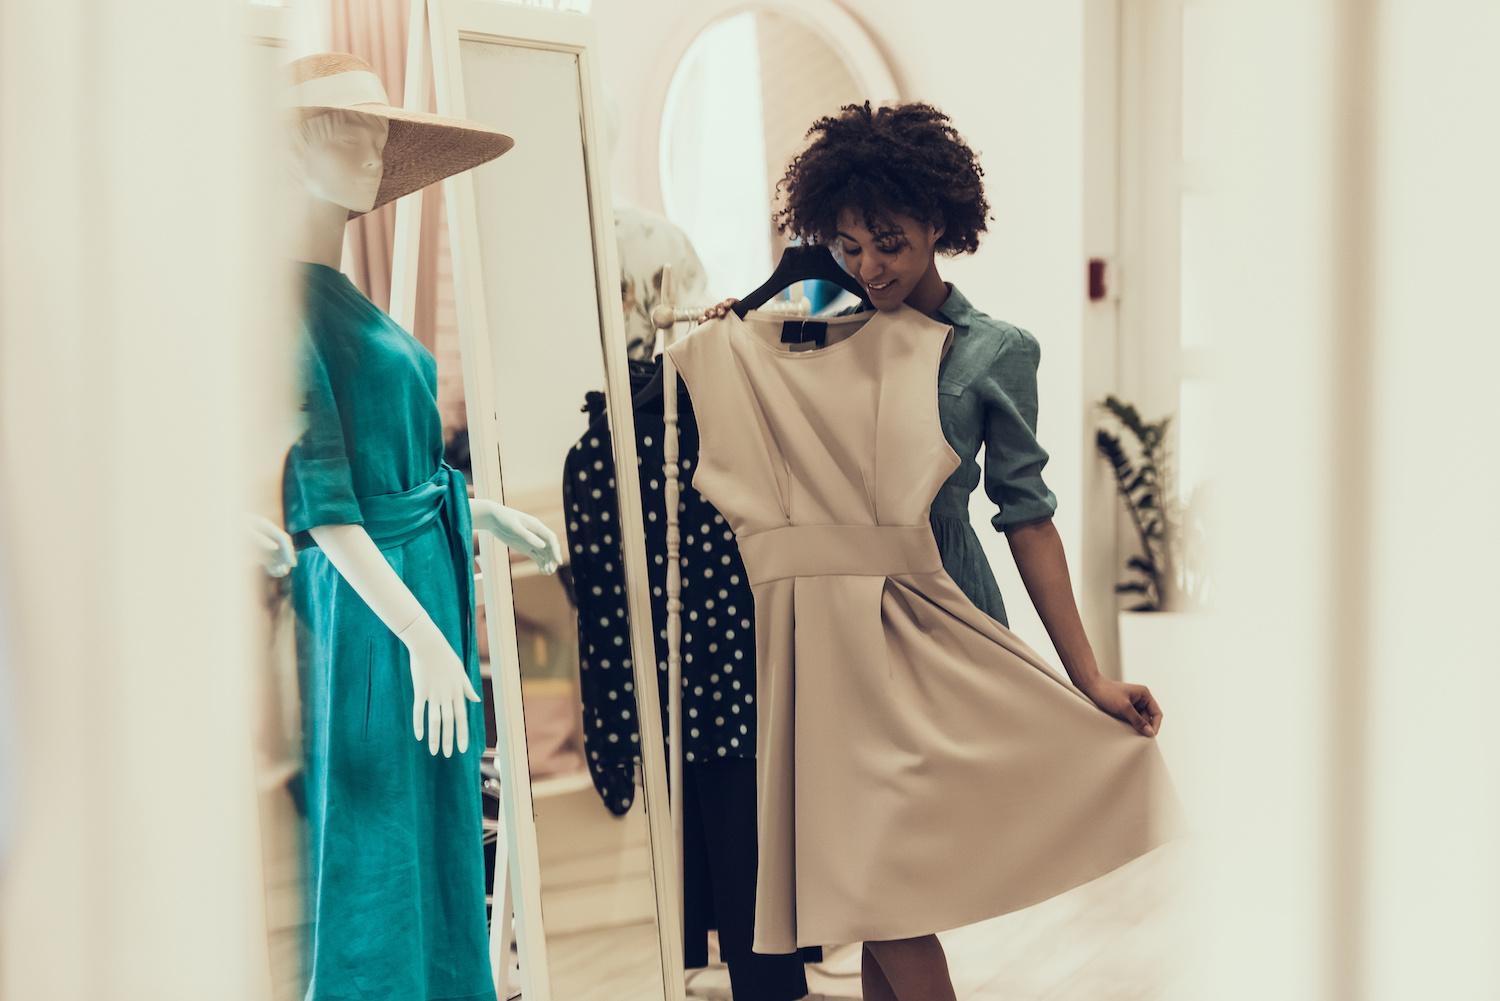 young woman shopping in boutique - Allies Should Speak Up When Black Customers Are Underserved